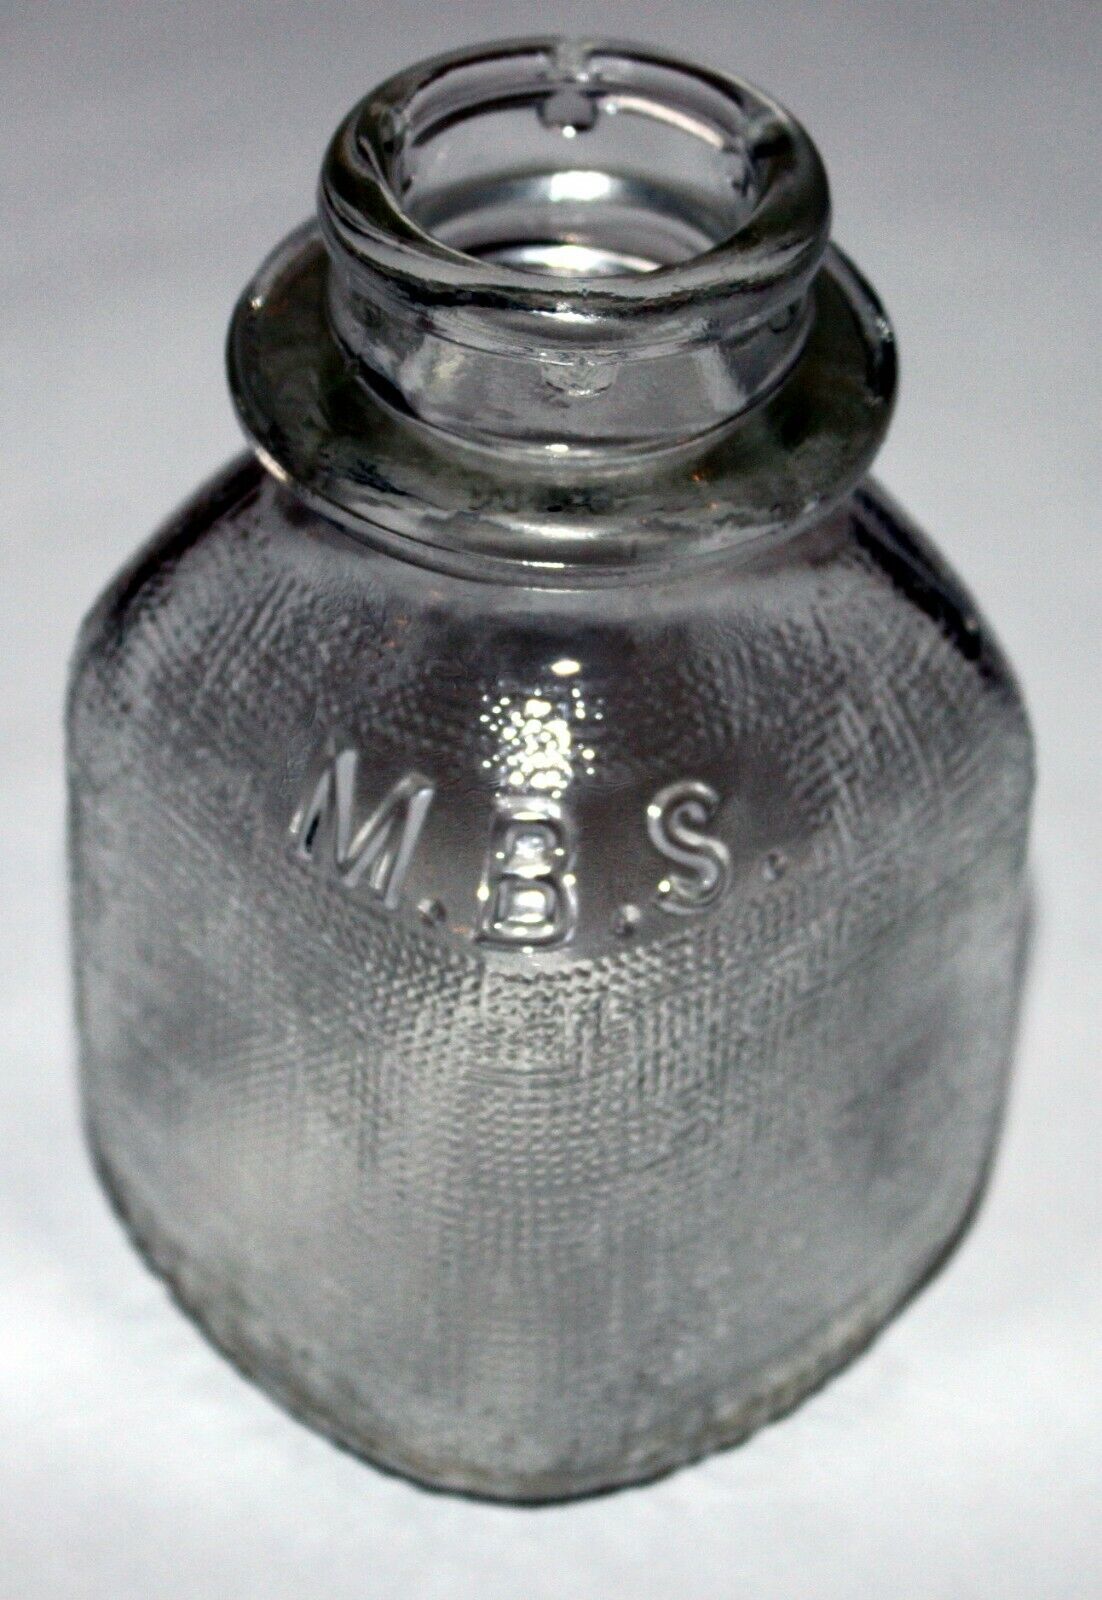 1959 MBS Indianapolis IN half 1/2 pt pint square milk bottle clear glass 